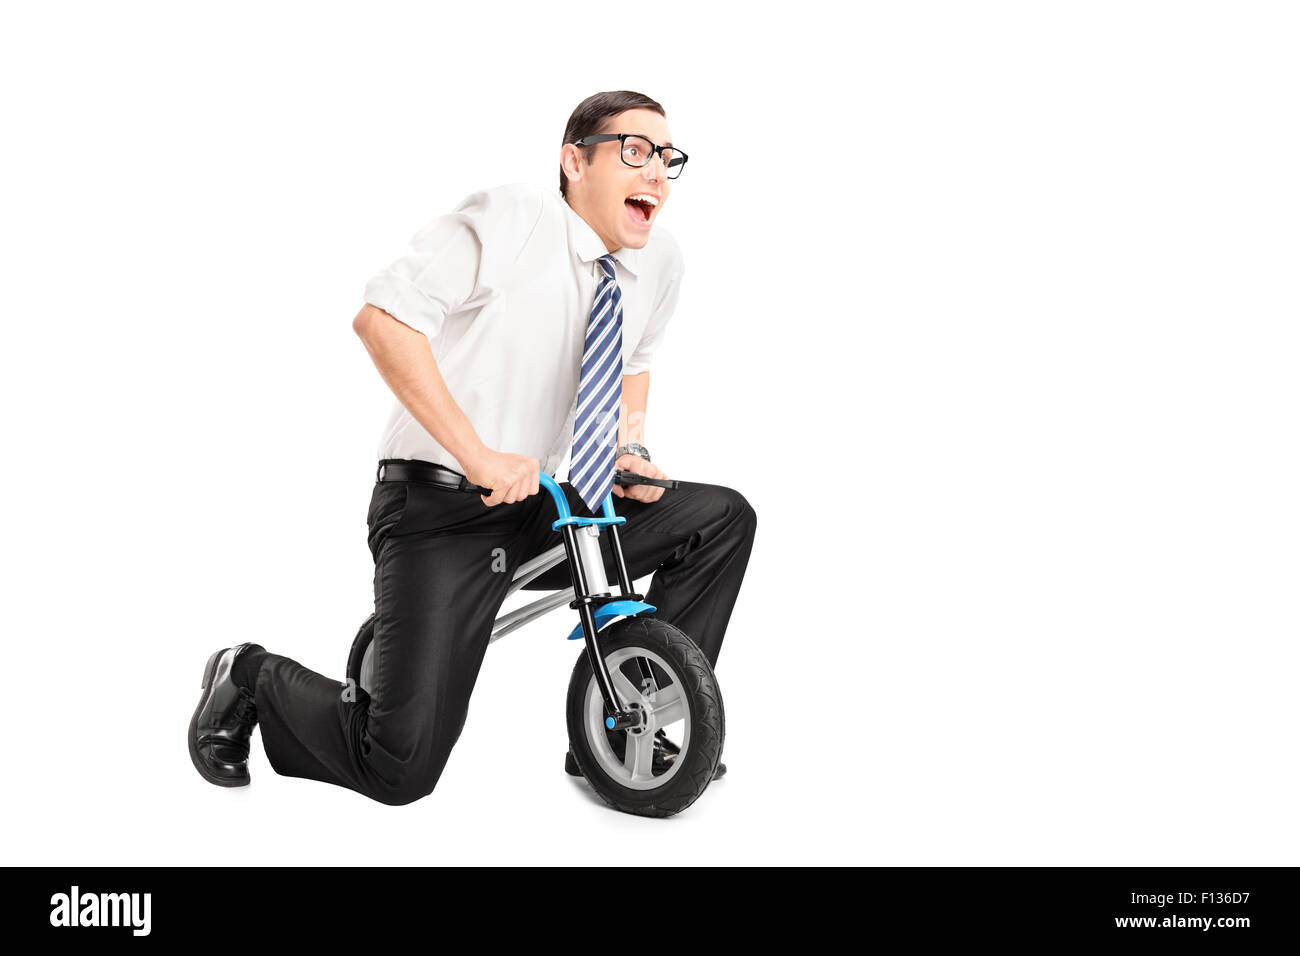 Silly young businessman riding a small bike and looking forward isolated on white background Stock Photo